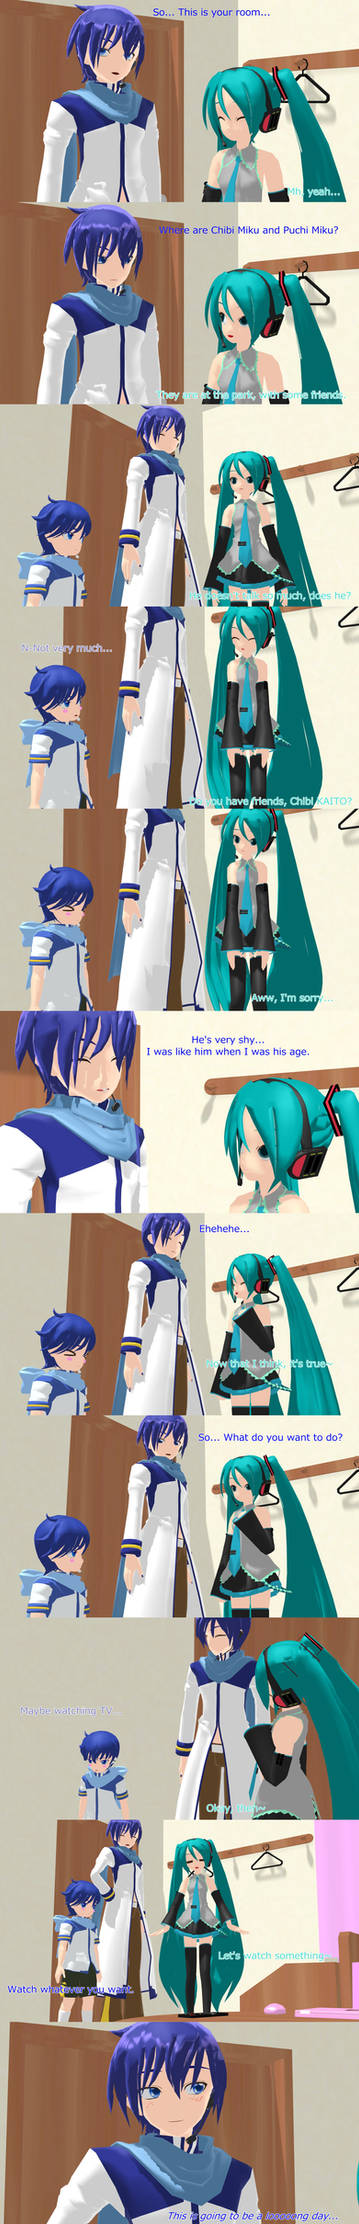 MMD - A little help with my brother... -part 2-